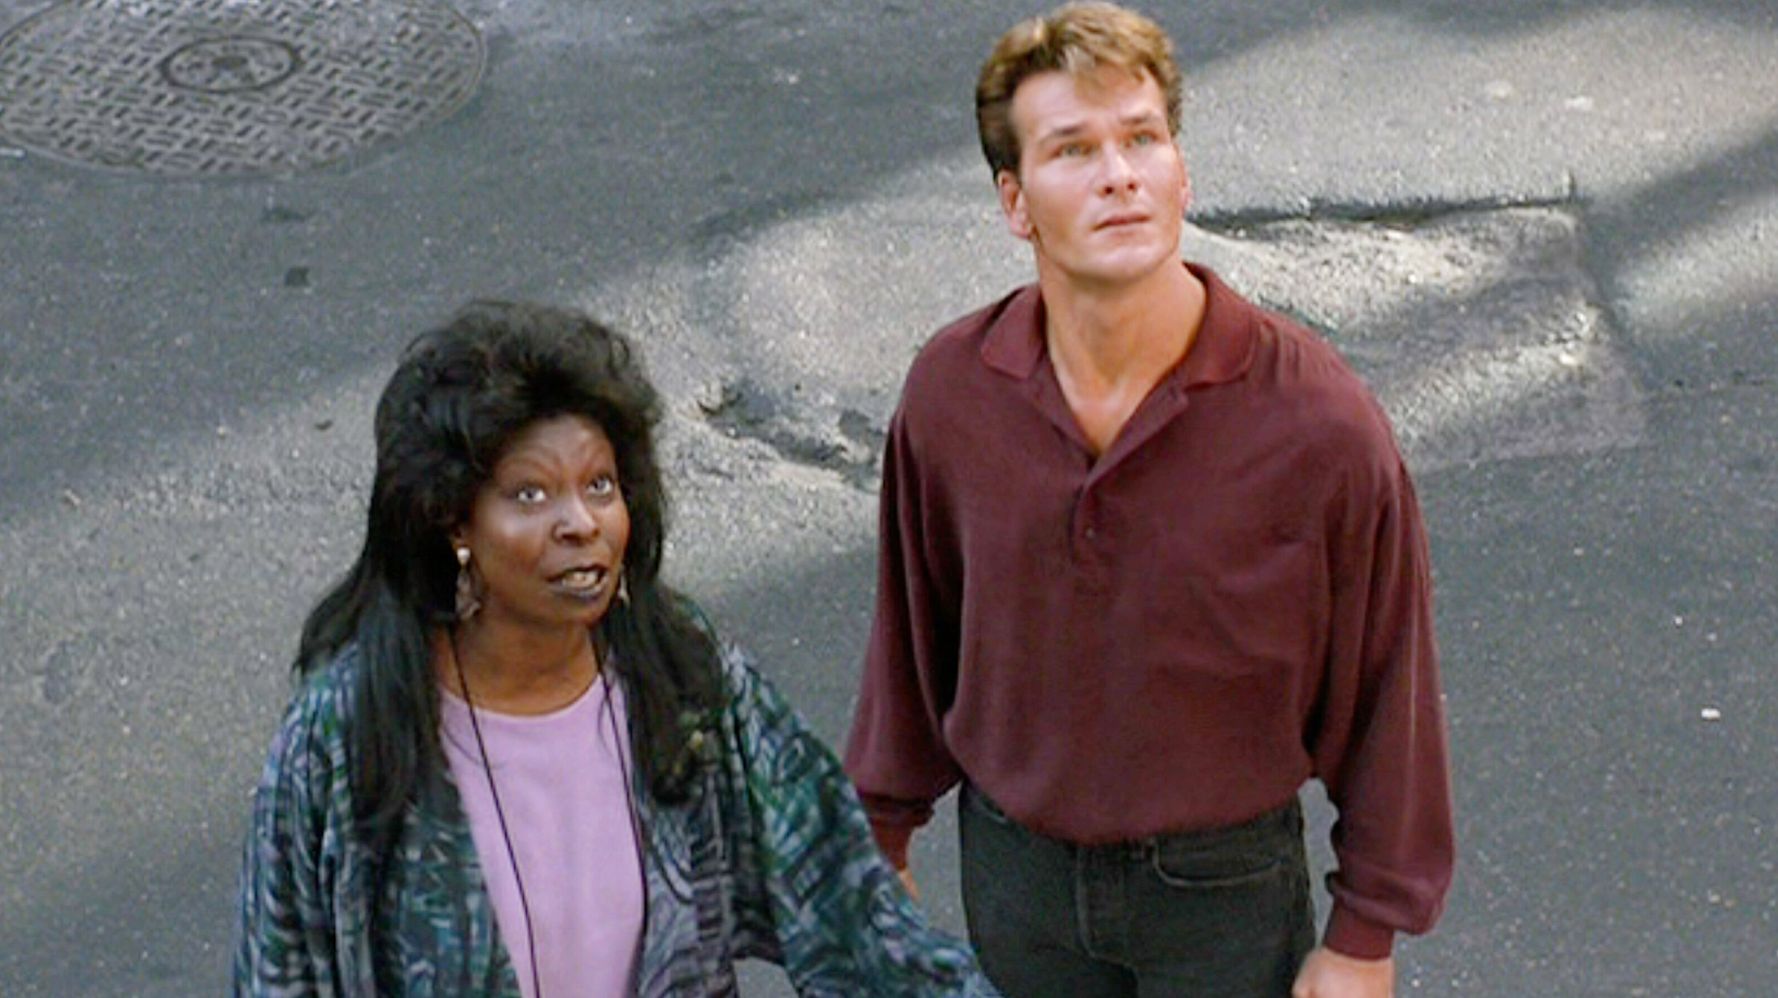 Whoopi Goldberg reveals that Patrick Swayze fought for her iconic “Ghost”